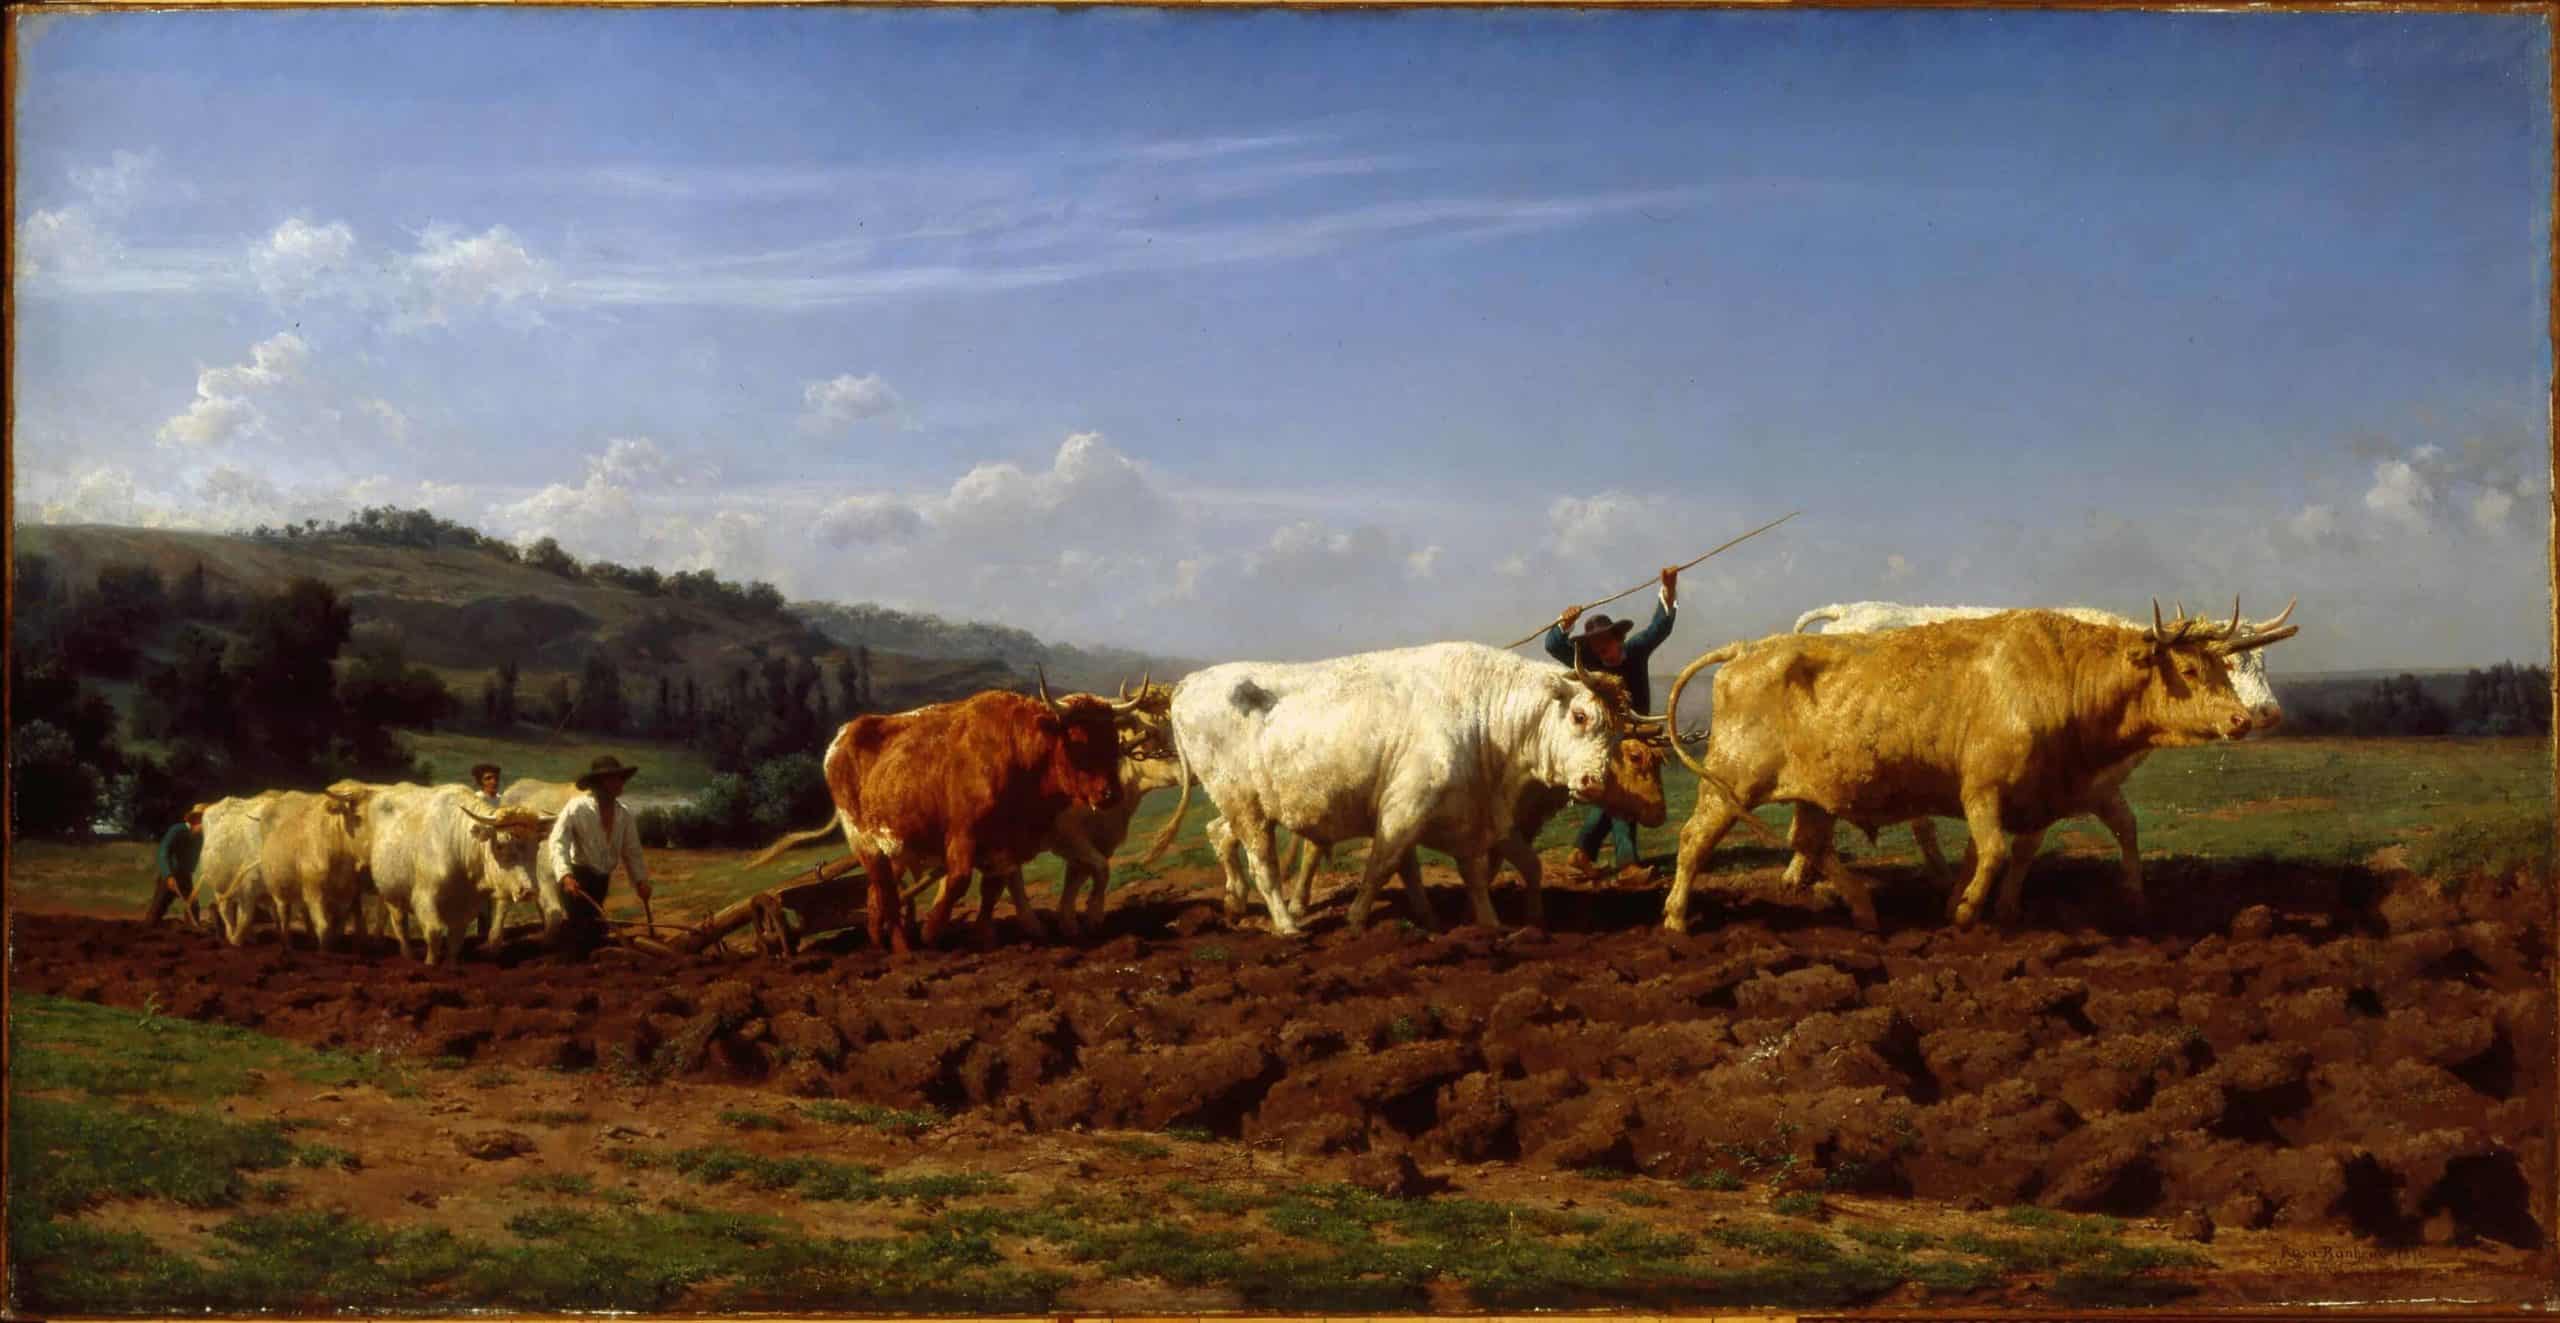 Rosa Bonheur's Plowing in Nivernais appeared at the Clark Art Institute in Williamstown in Women Artists in Paris 1850 to 1910.